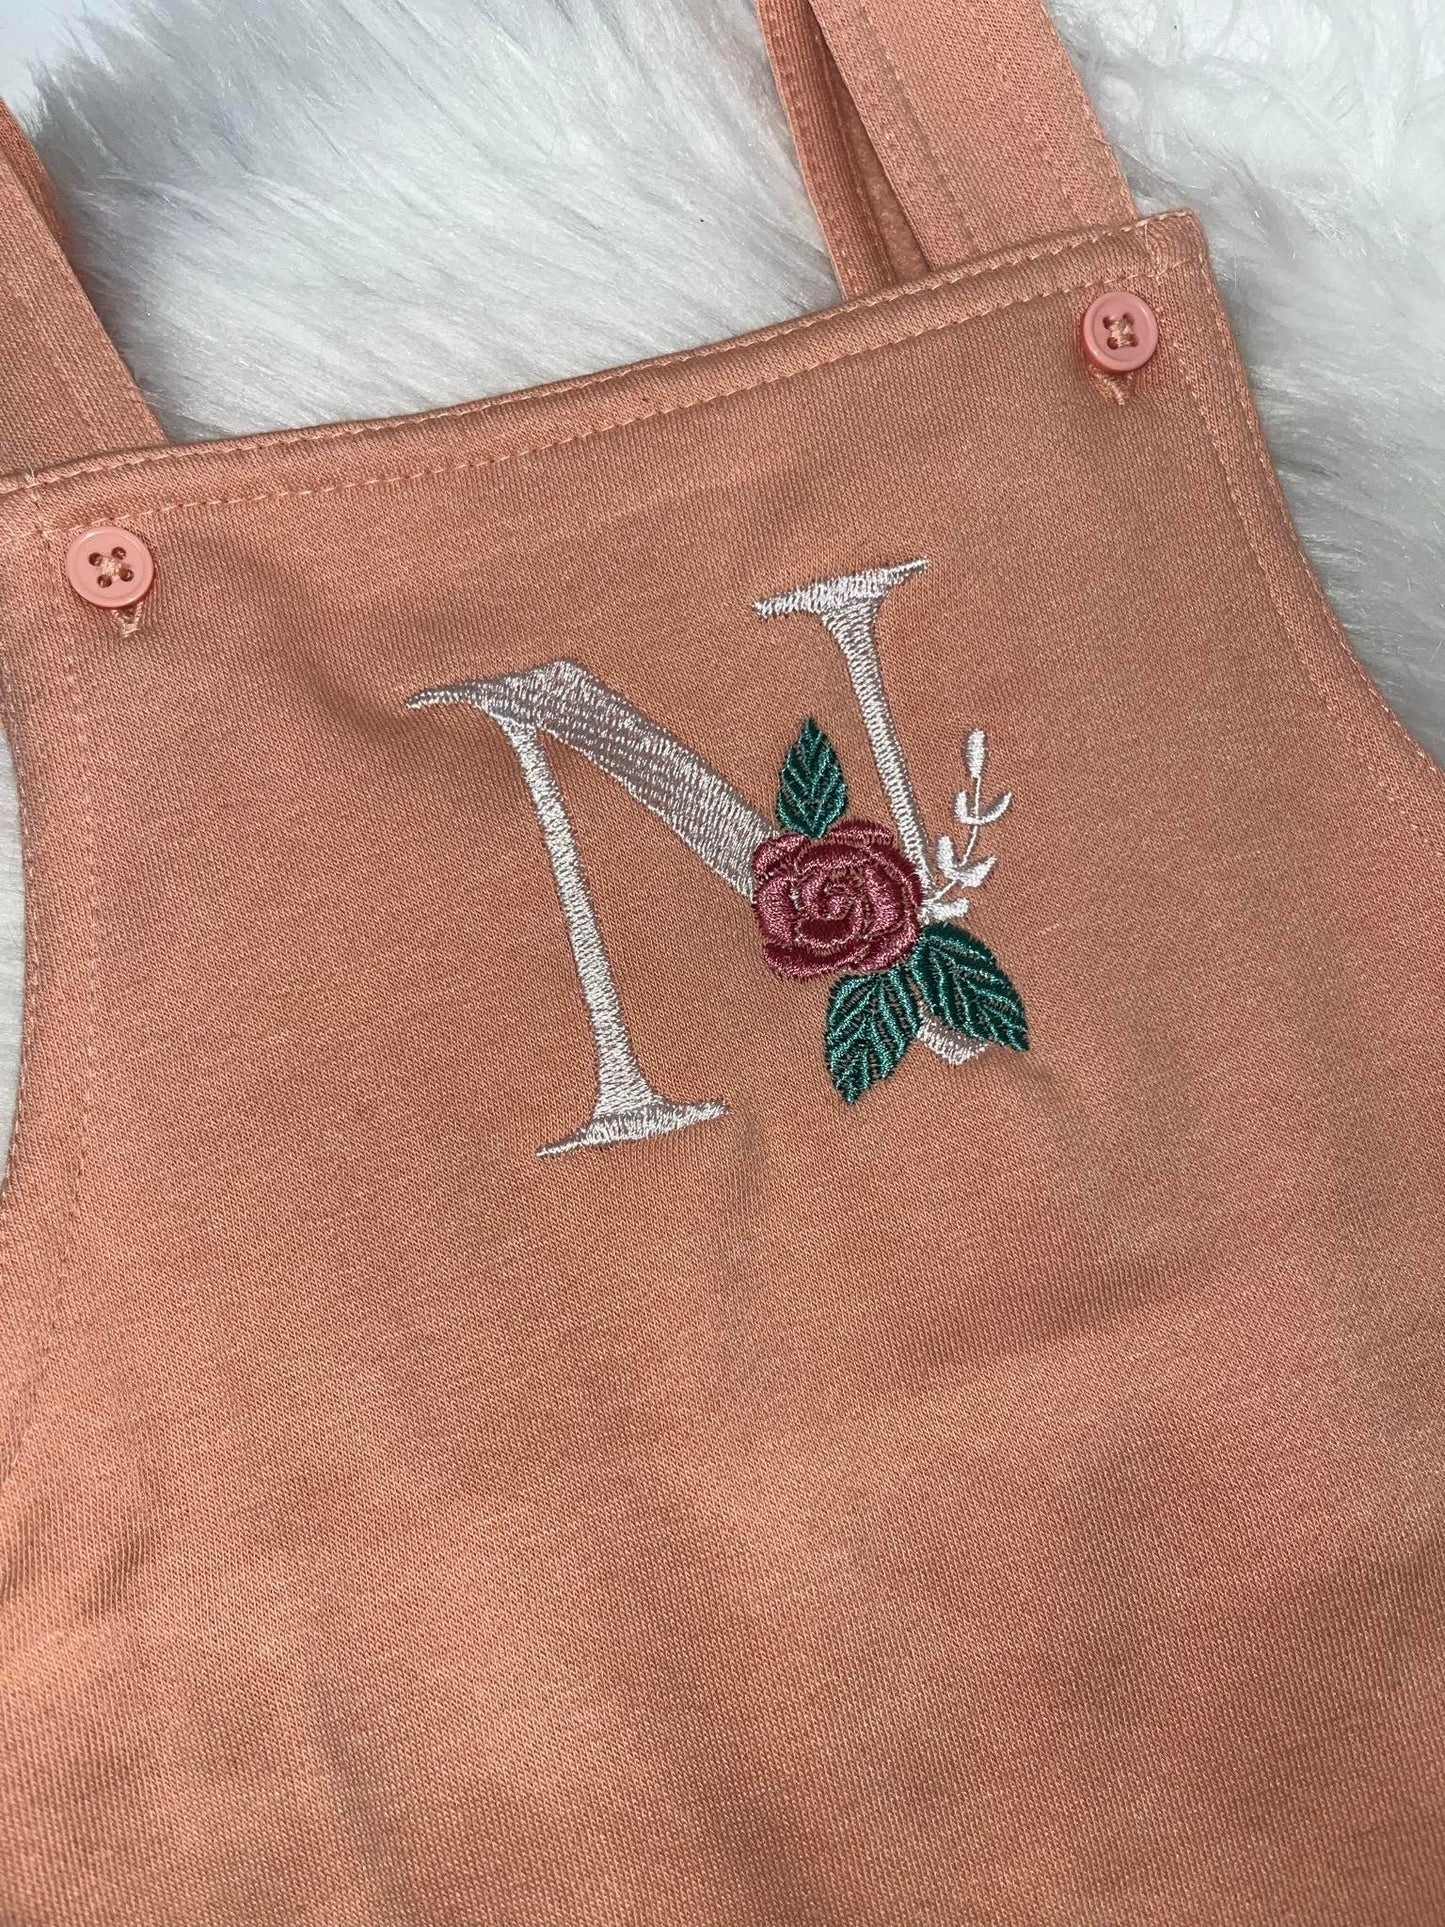 Floral initial personalised dungaree set - various colours